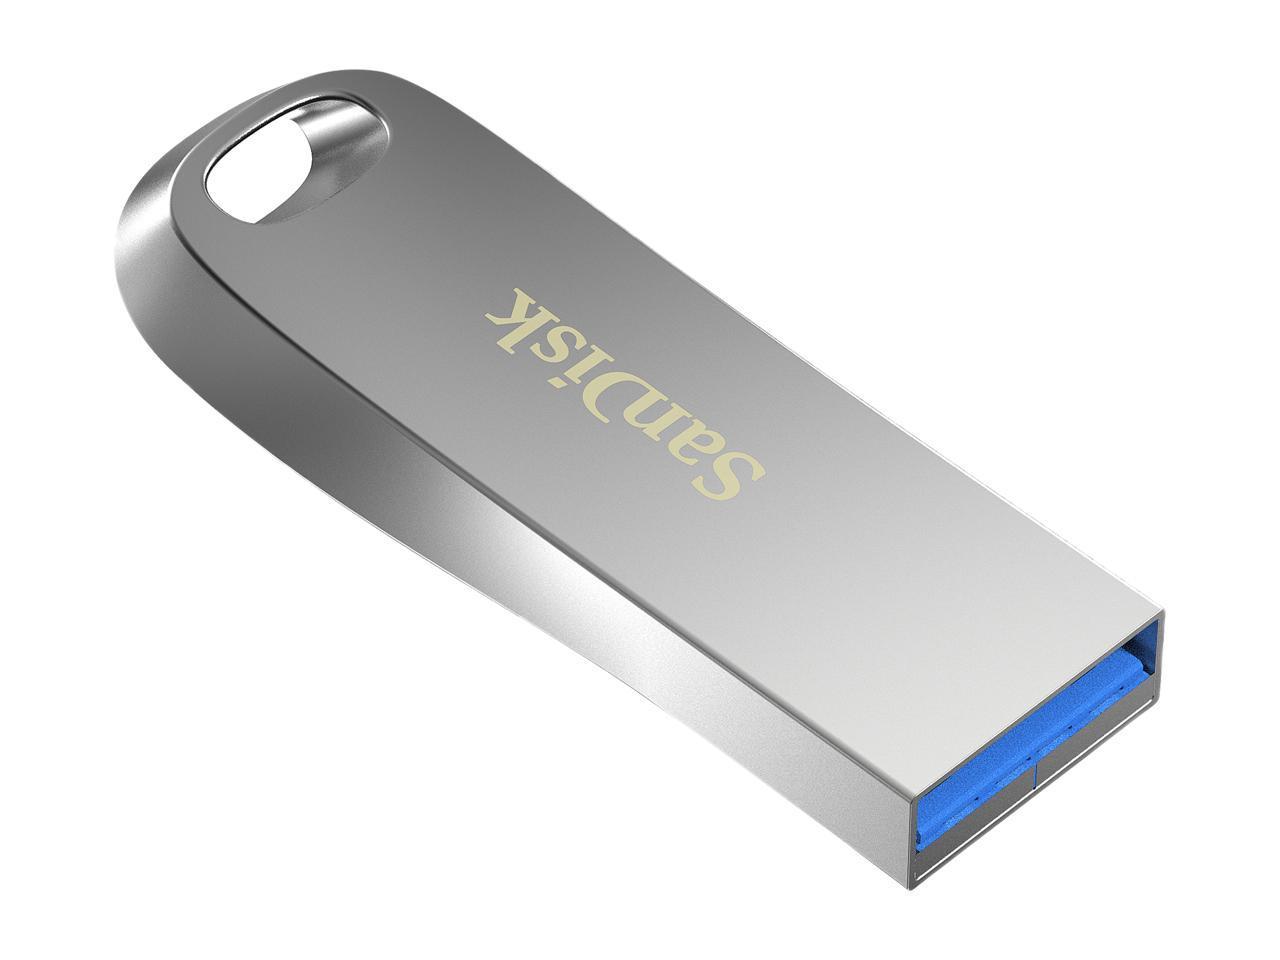 128GB SanDisk Ultra Luxe USB 3.1 Flash Drive for $11.99 Shipped